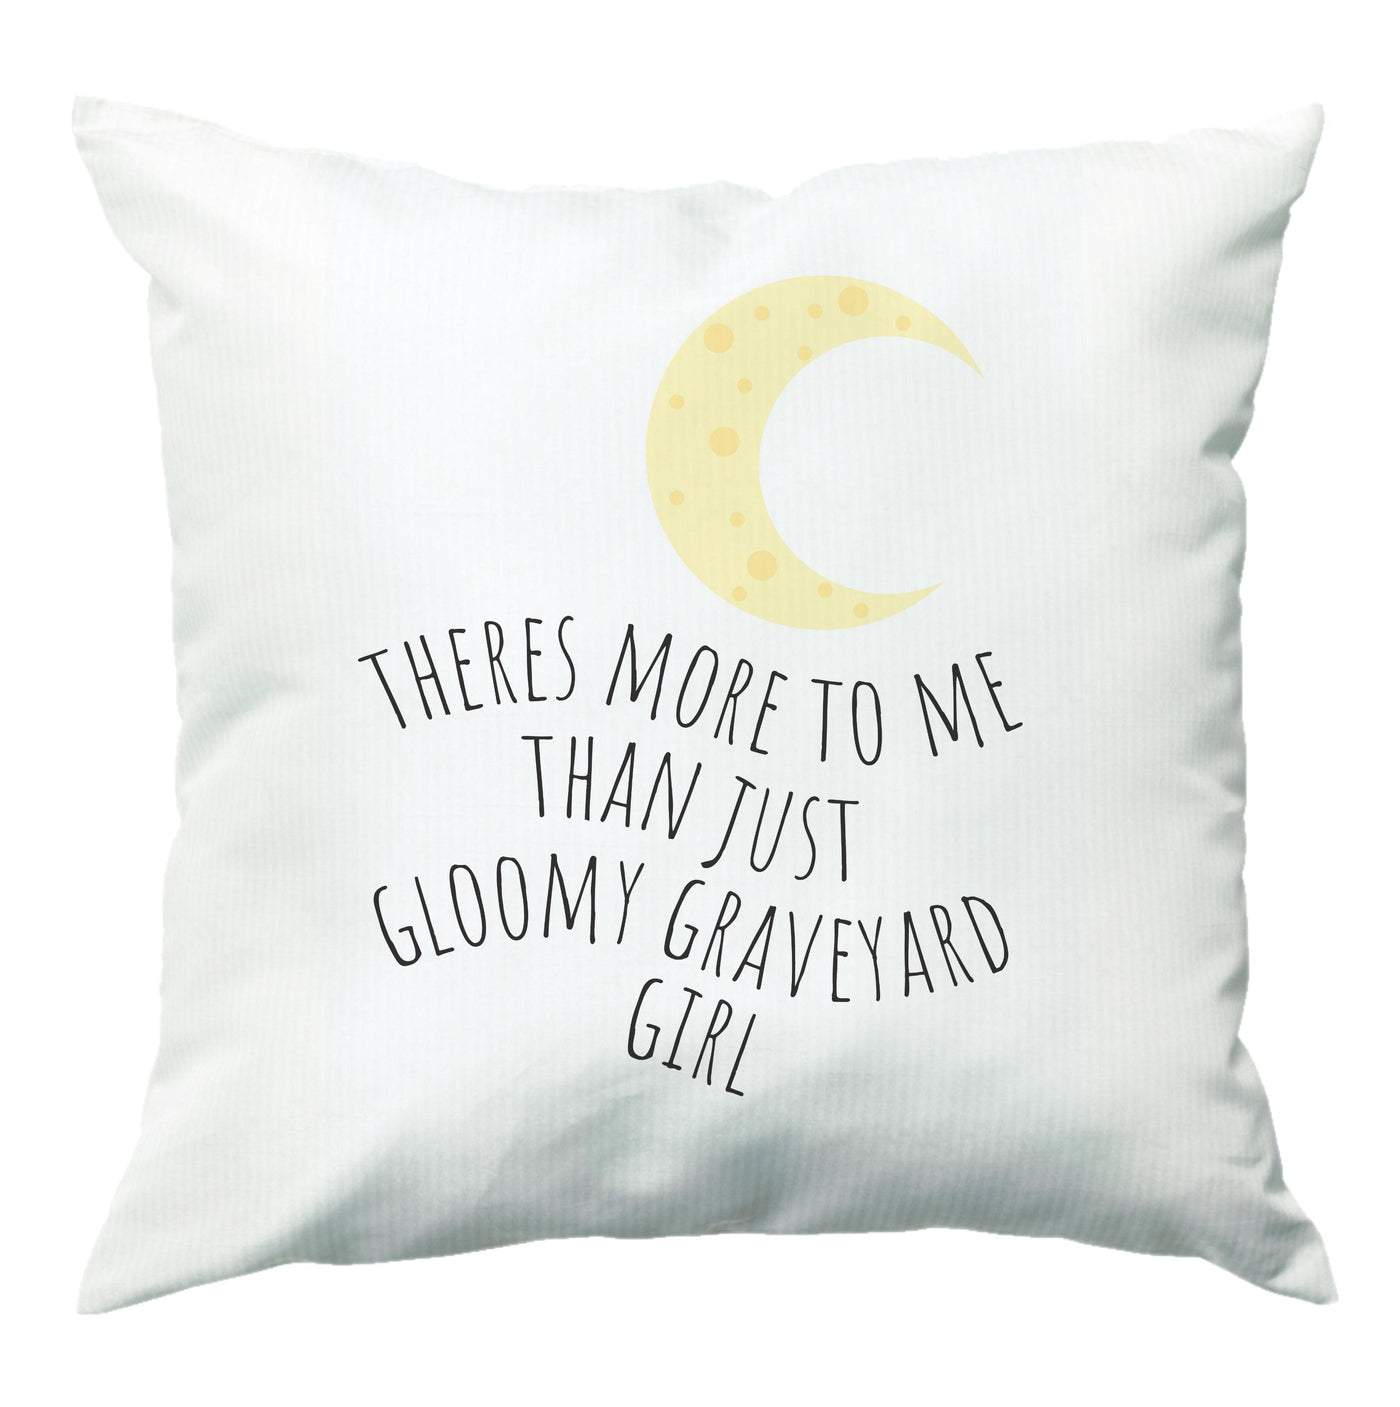 Theres More To Me - TV Quotes Cushion